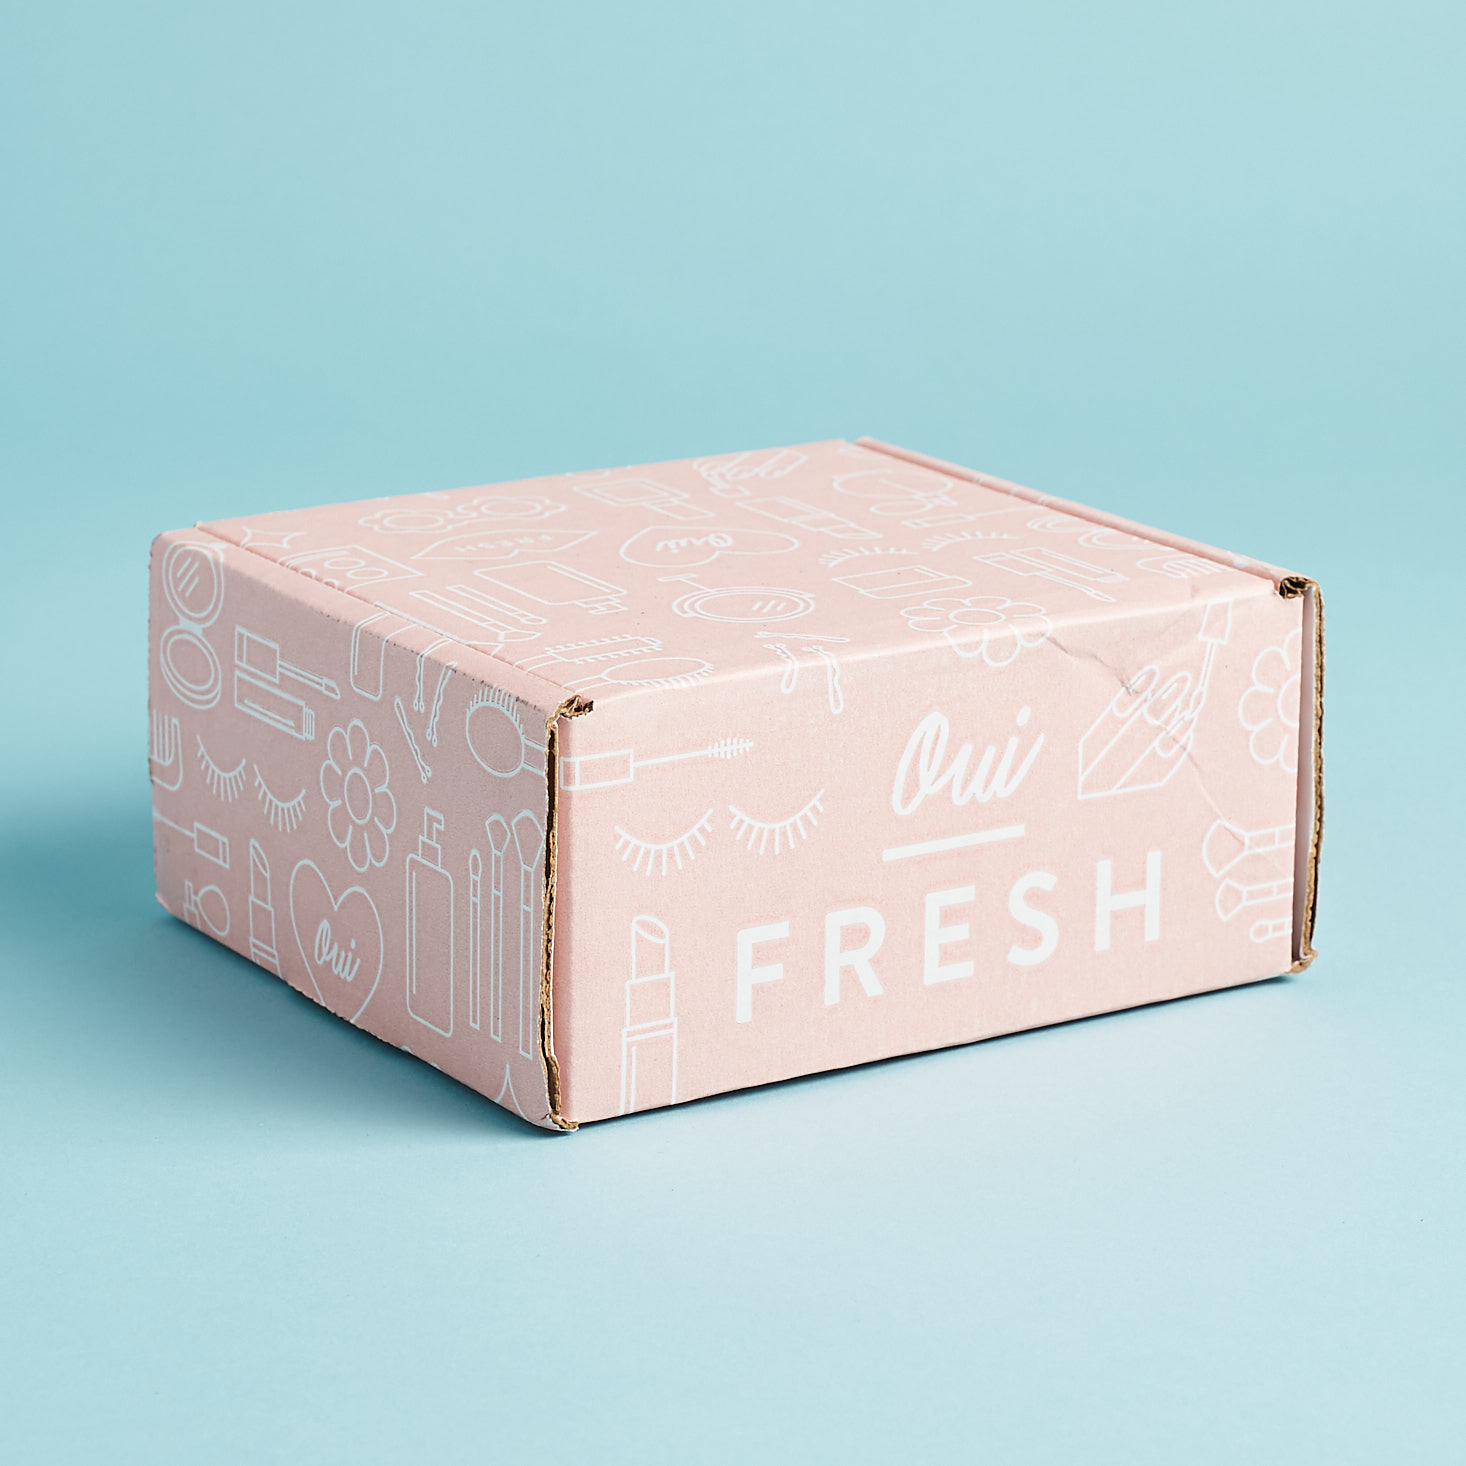 Oui Fresh Beauty Box Subscription Review – October 2018